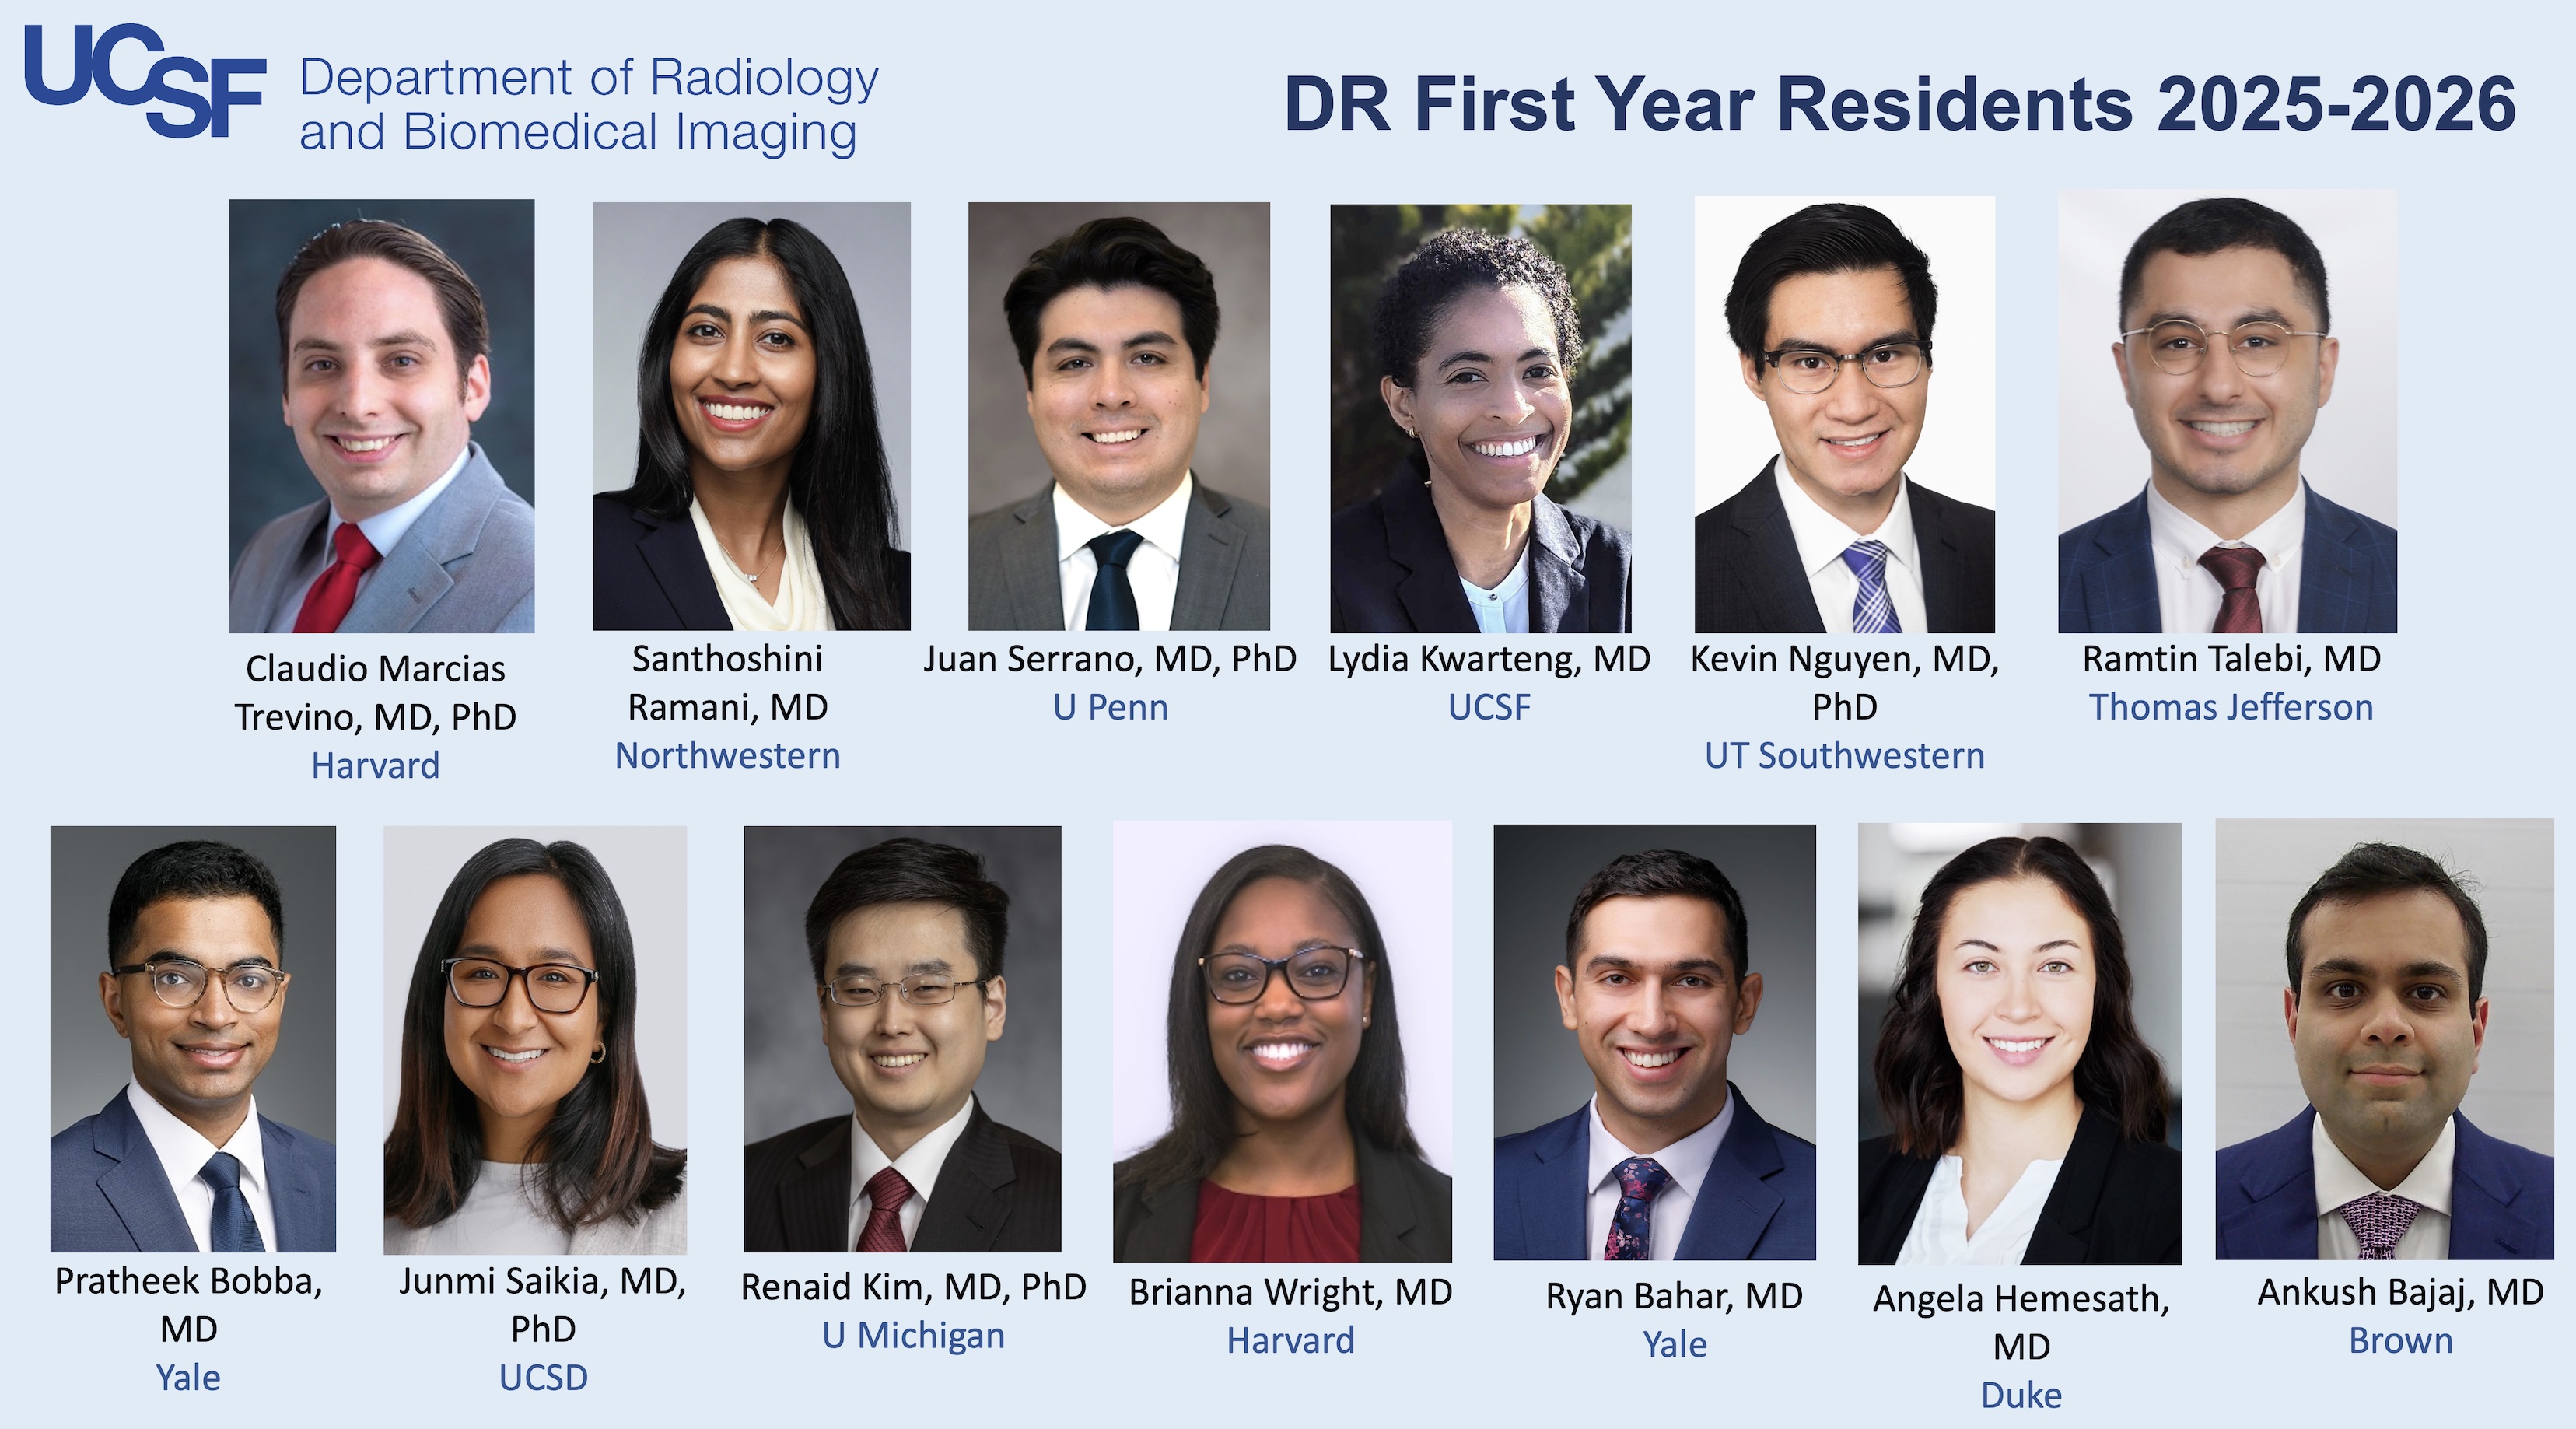 UCSF Radiology DR First Year Residents 2025-2026